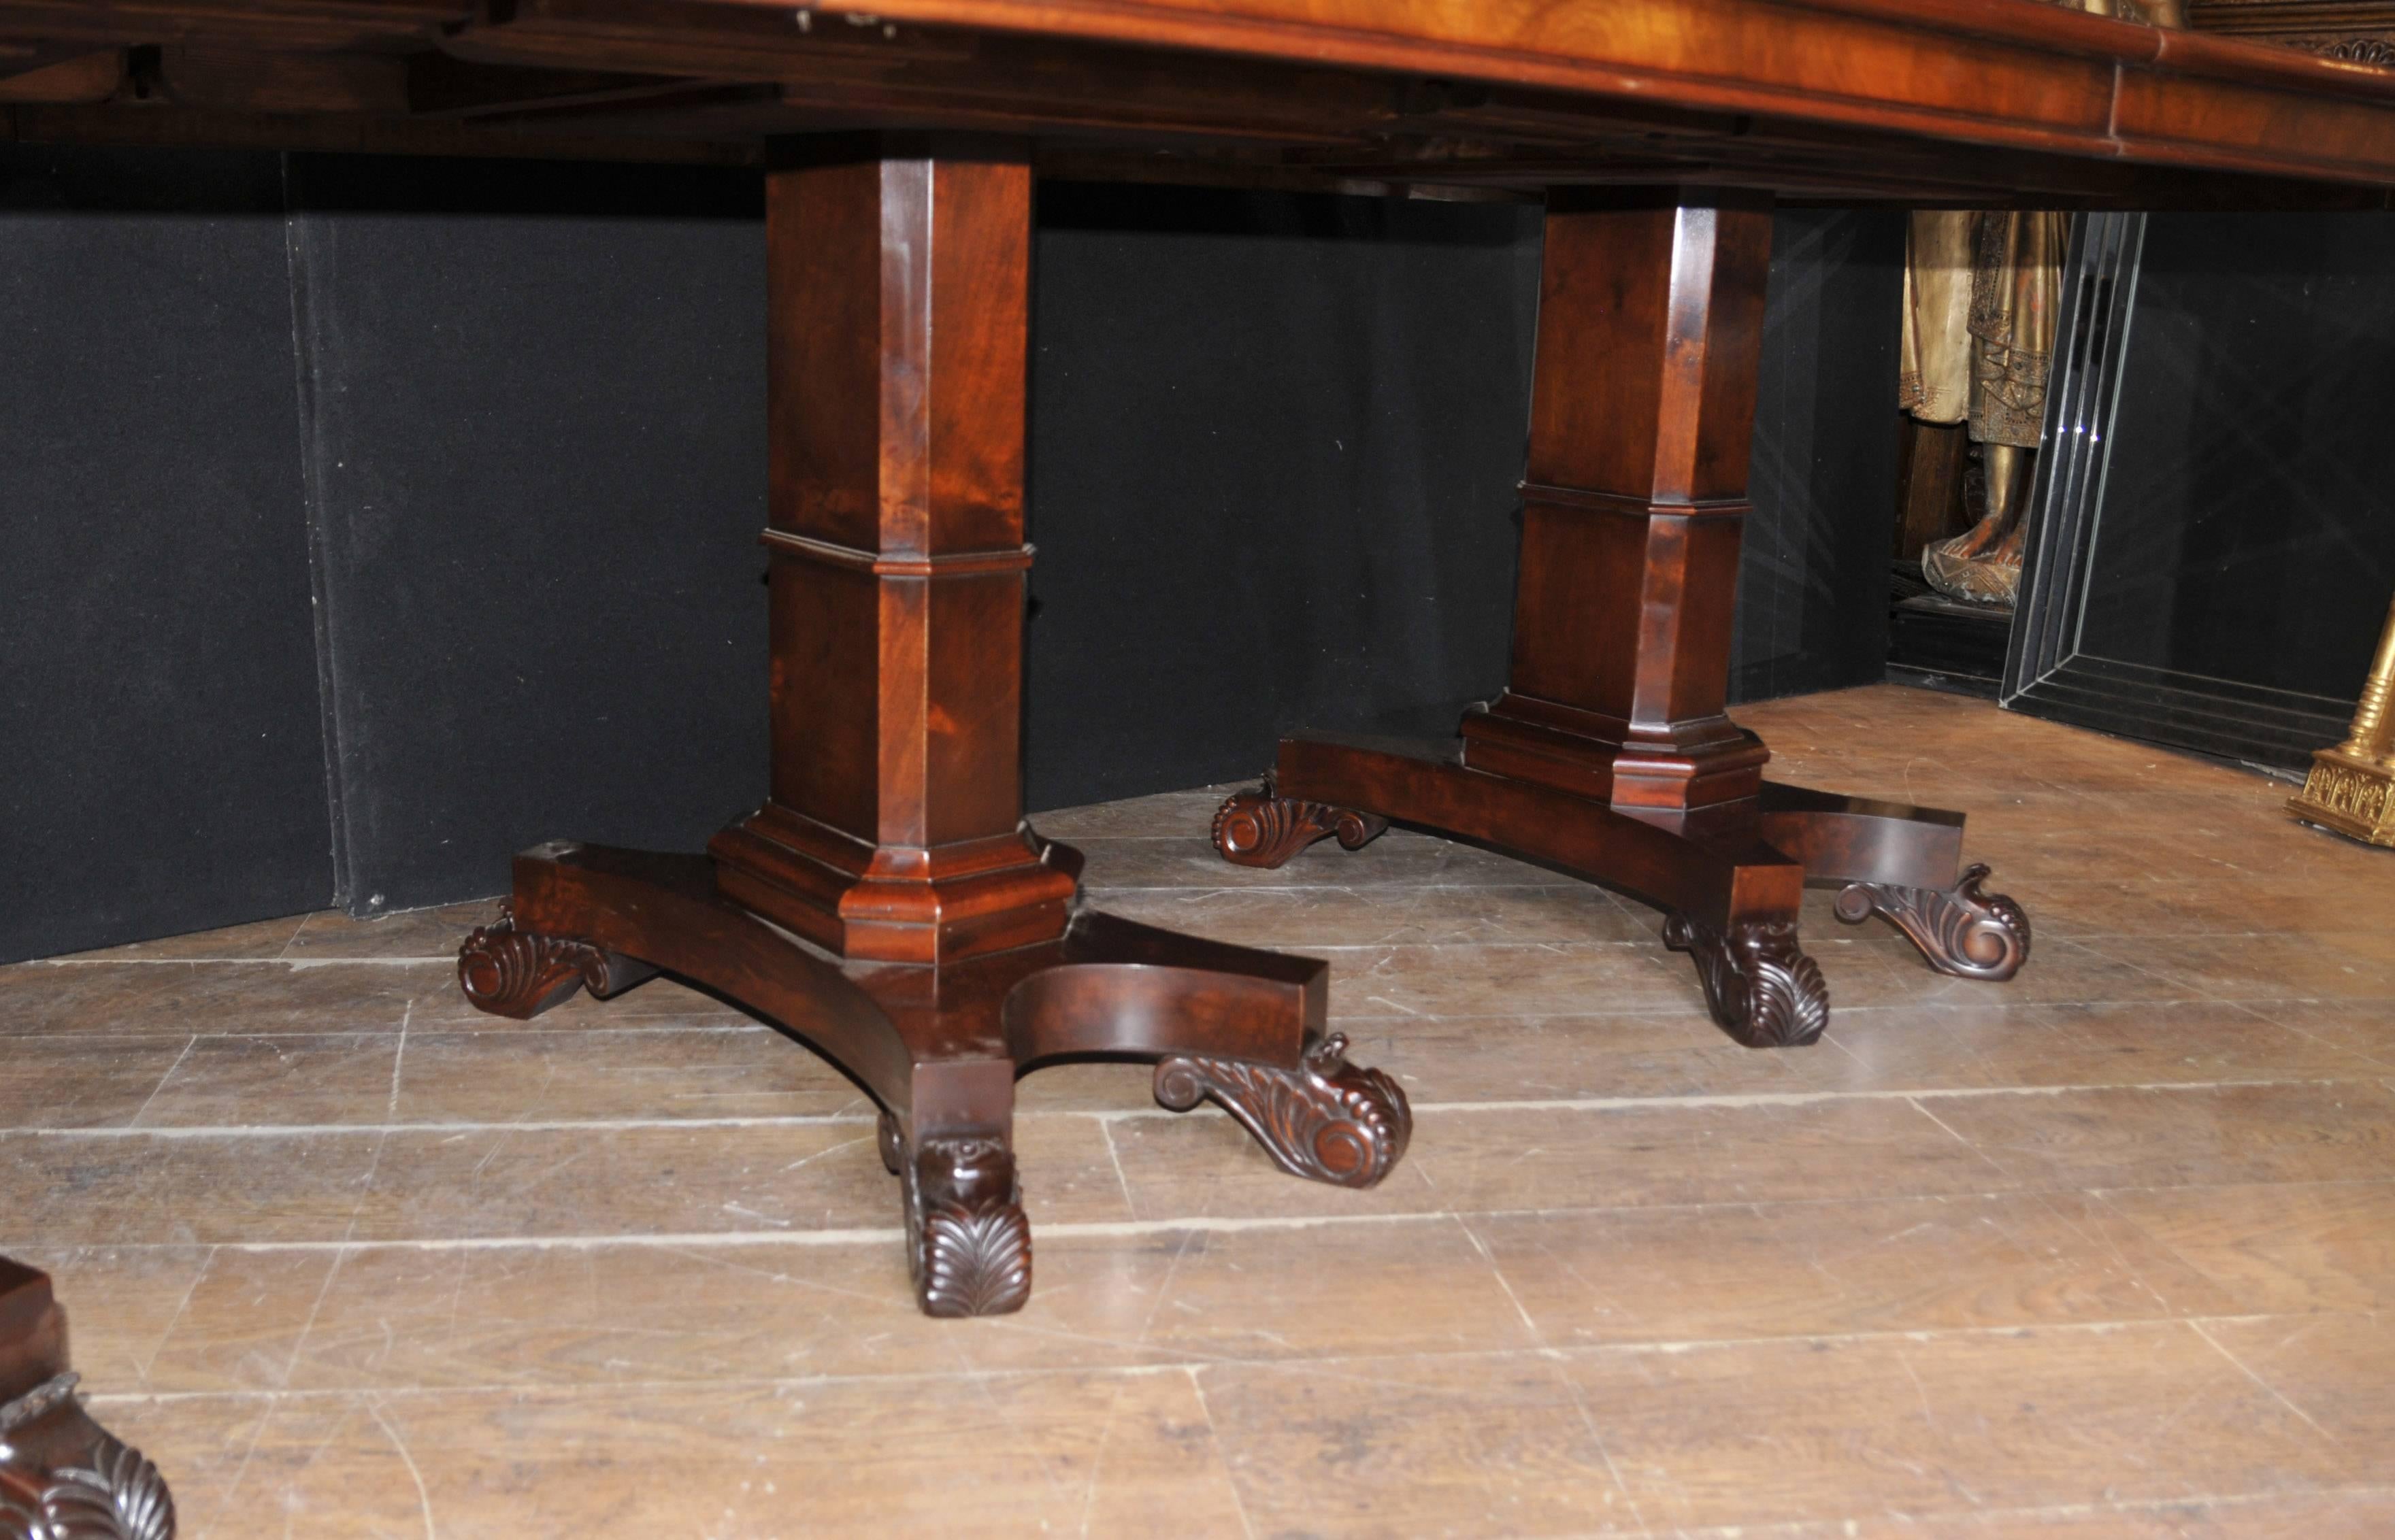 Sumptuous Regency style dining table in mahogany in the style of George Bullock.
Triple pedestal dining table which extends to 12 feet (365 cm) with the two extra leaves in.
Hence there are various different size combinations with the two leaves